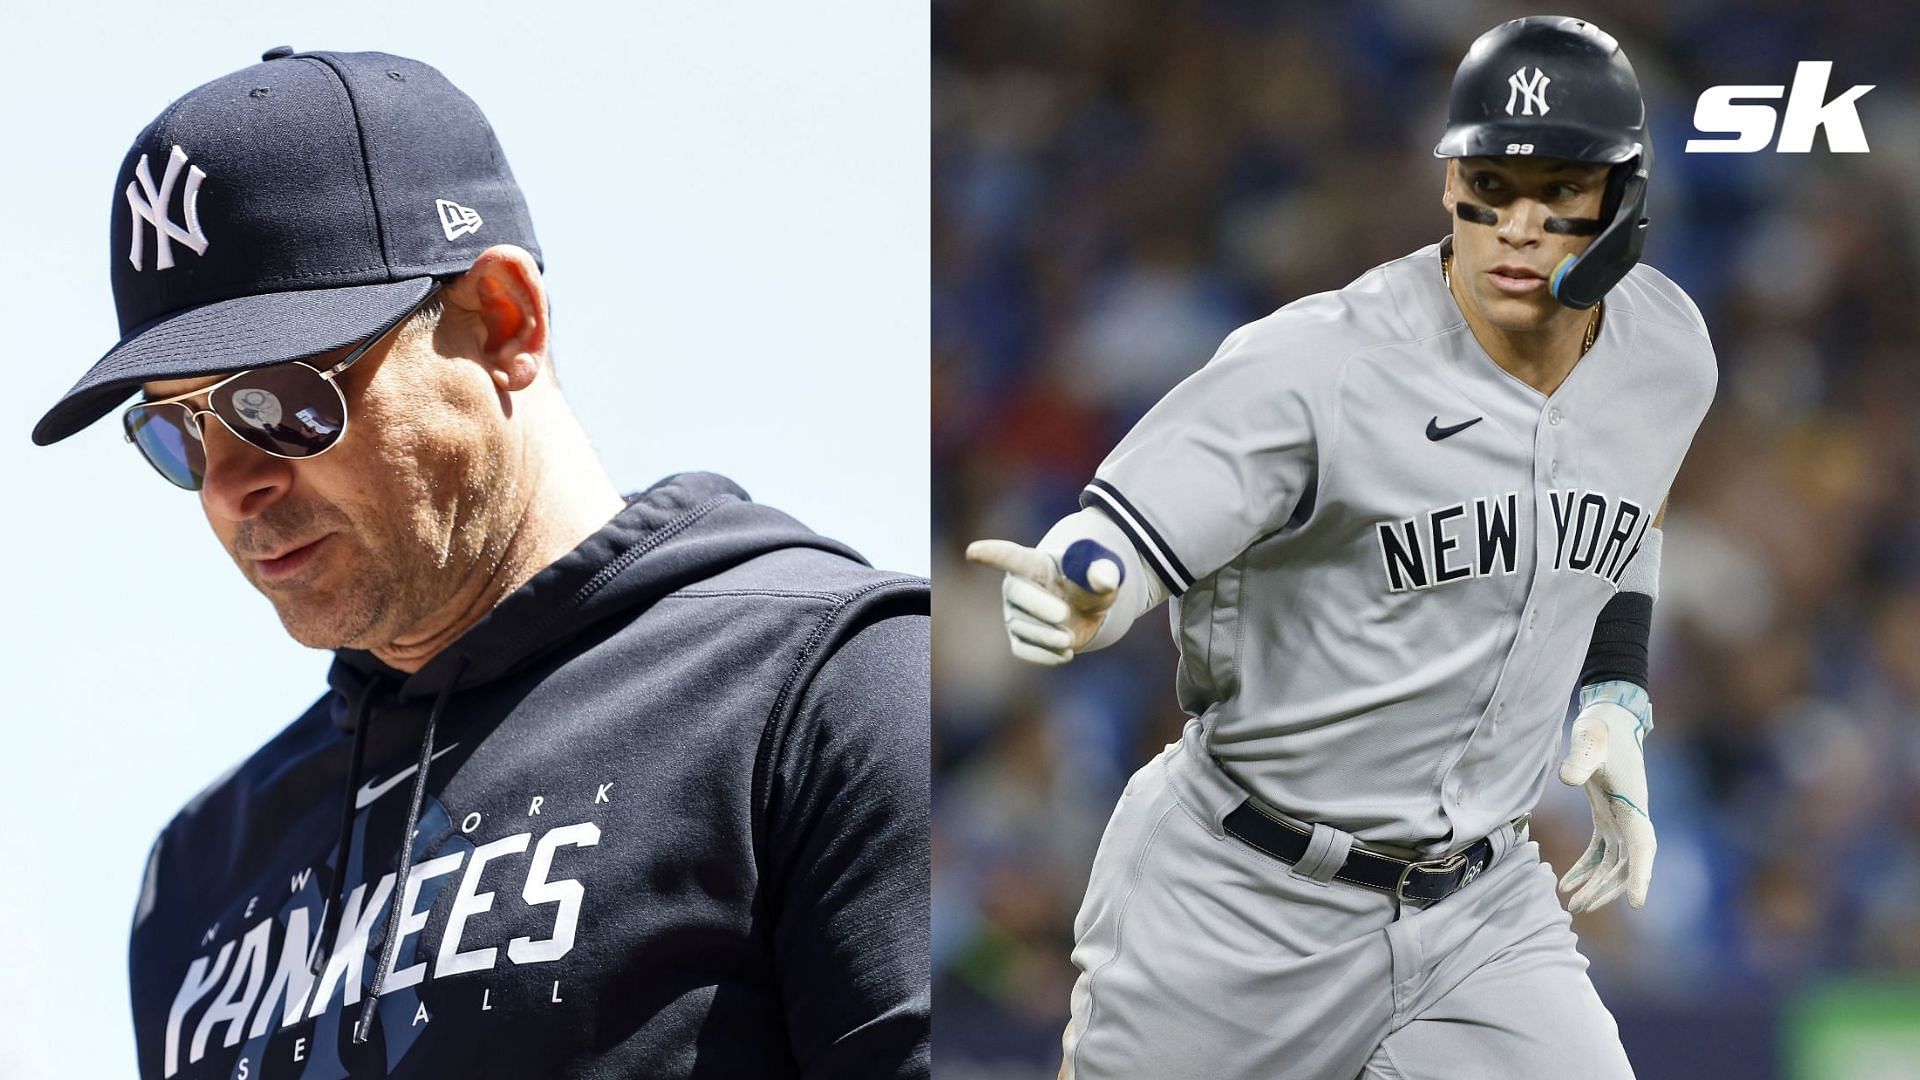 Aaron Boone suggests that New York Yankees slugger Aaron Judge could bat third in the lineup this season